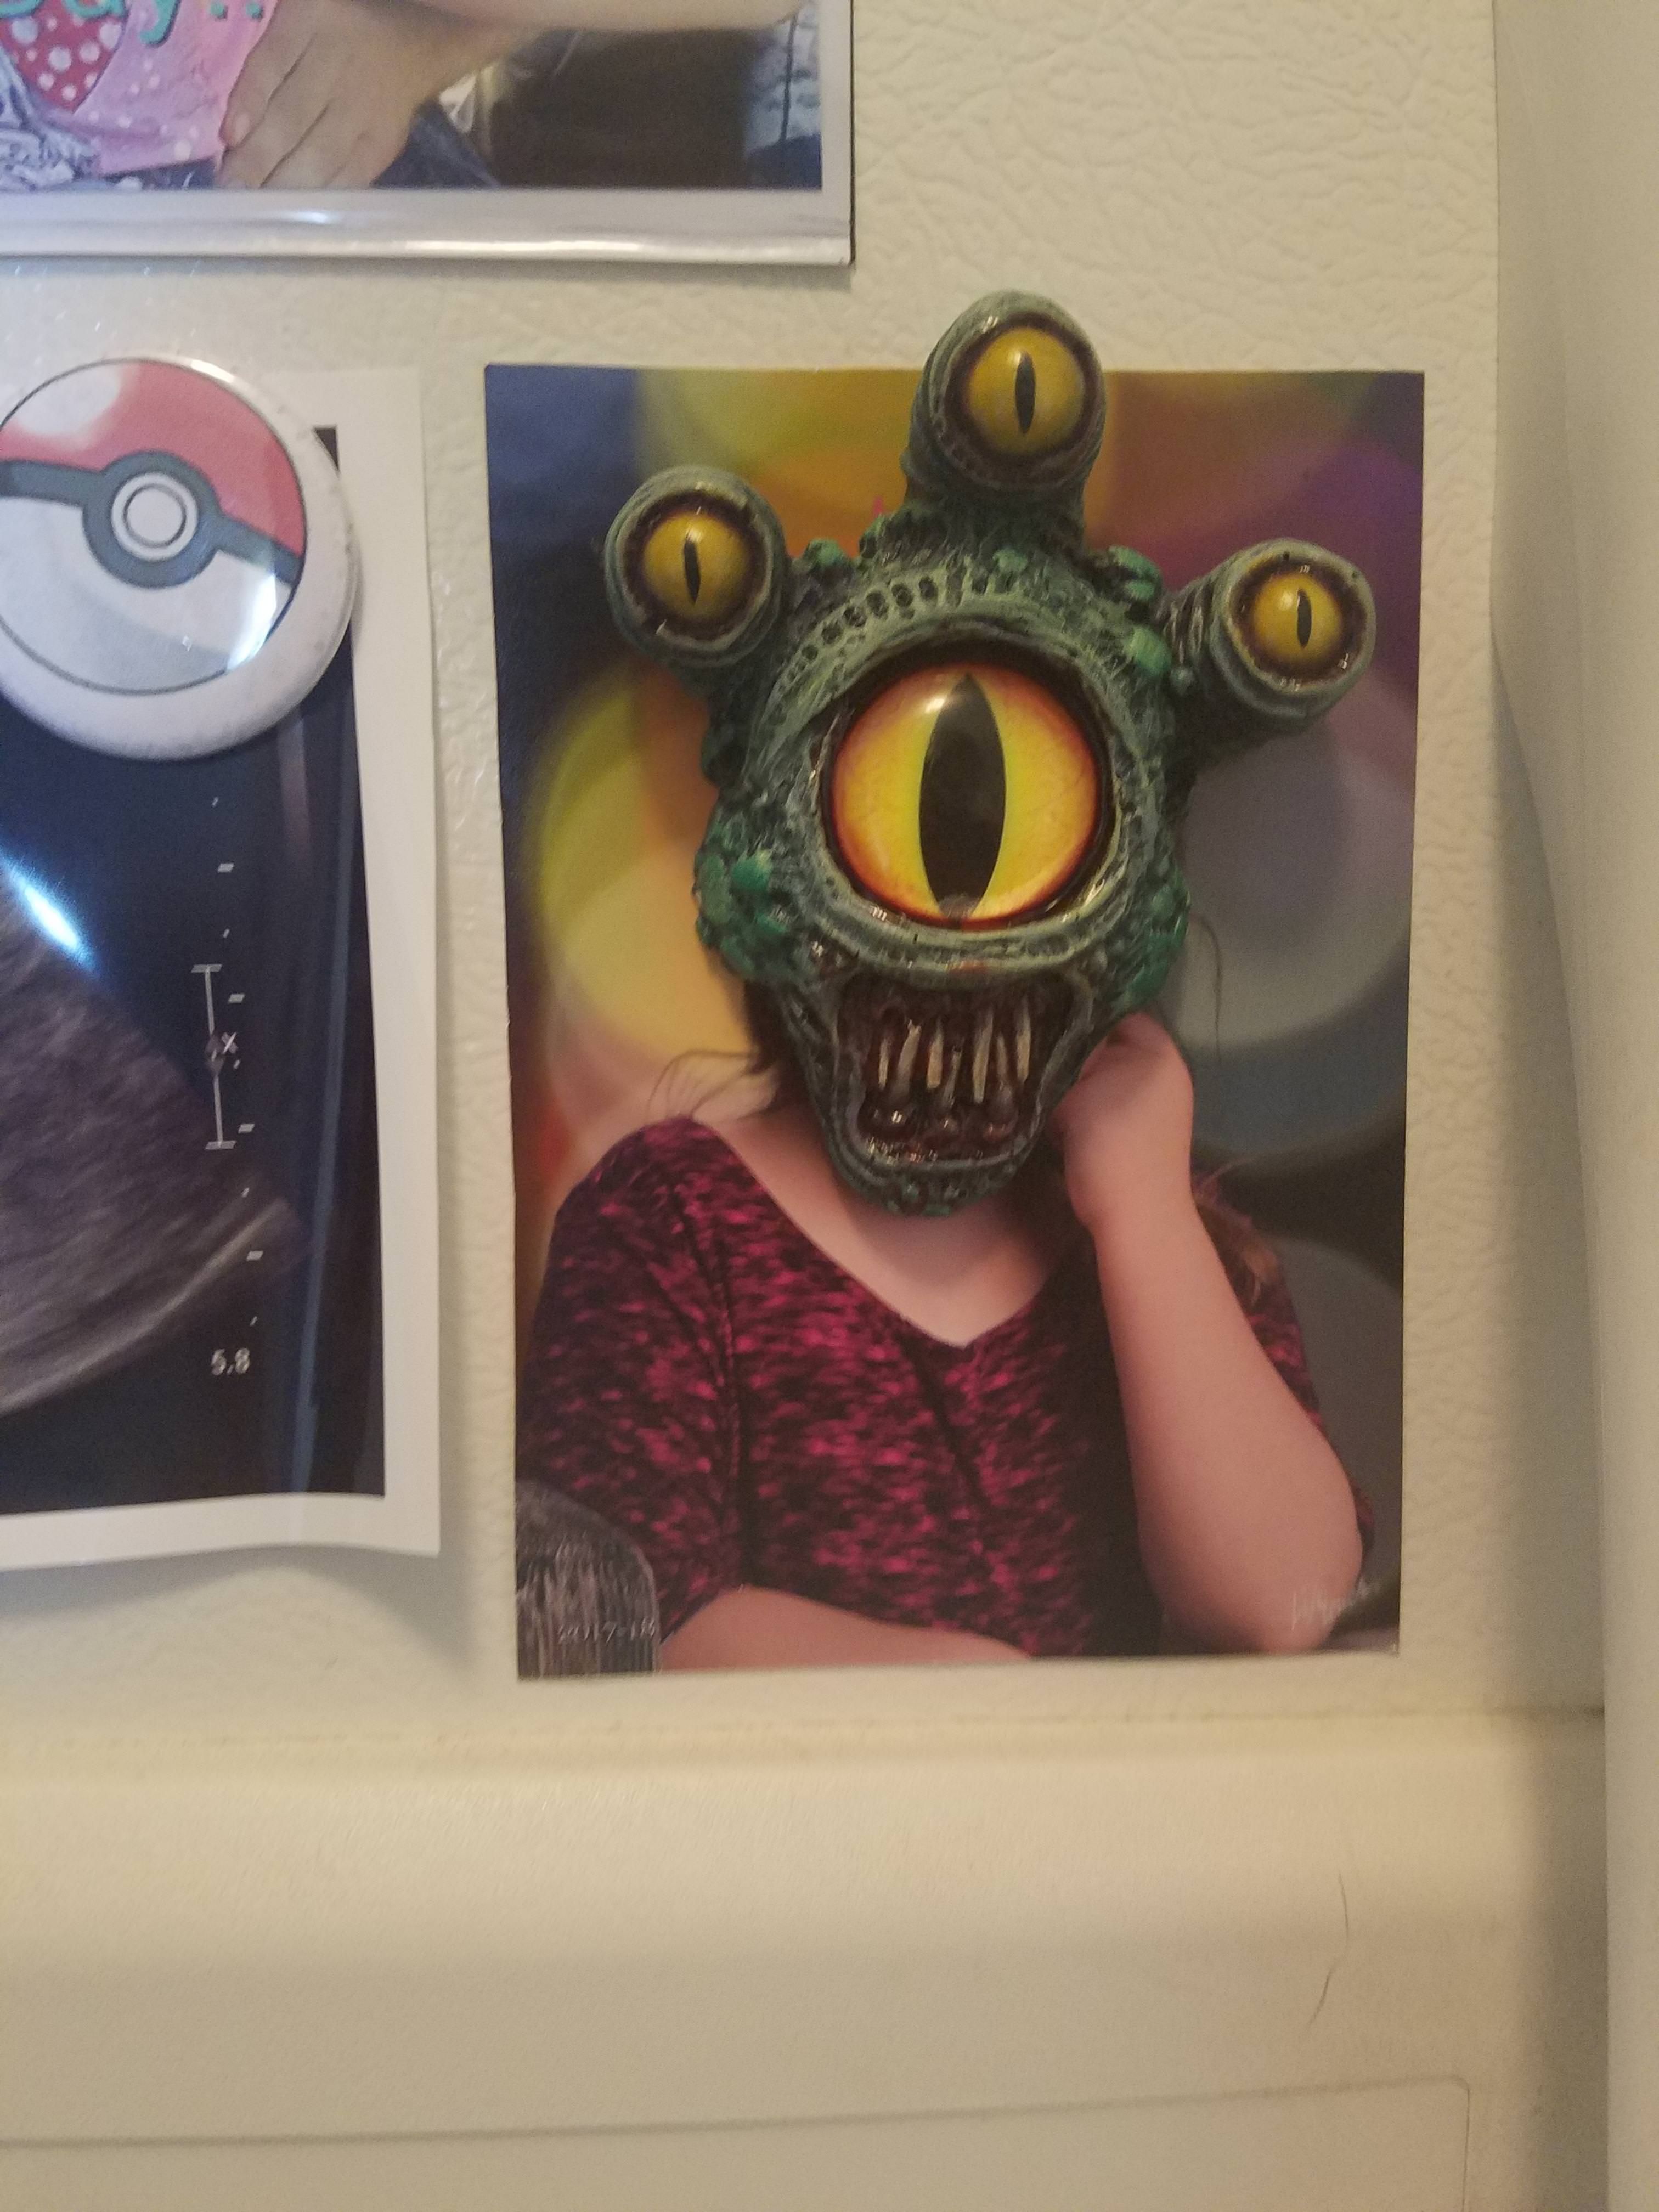 Found the perfect magnet to go with my kids school picture